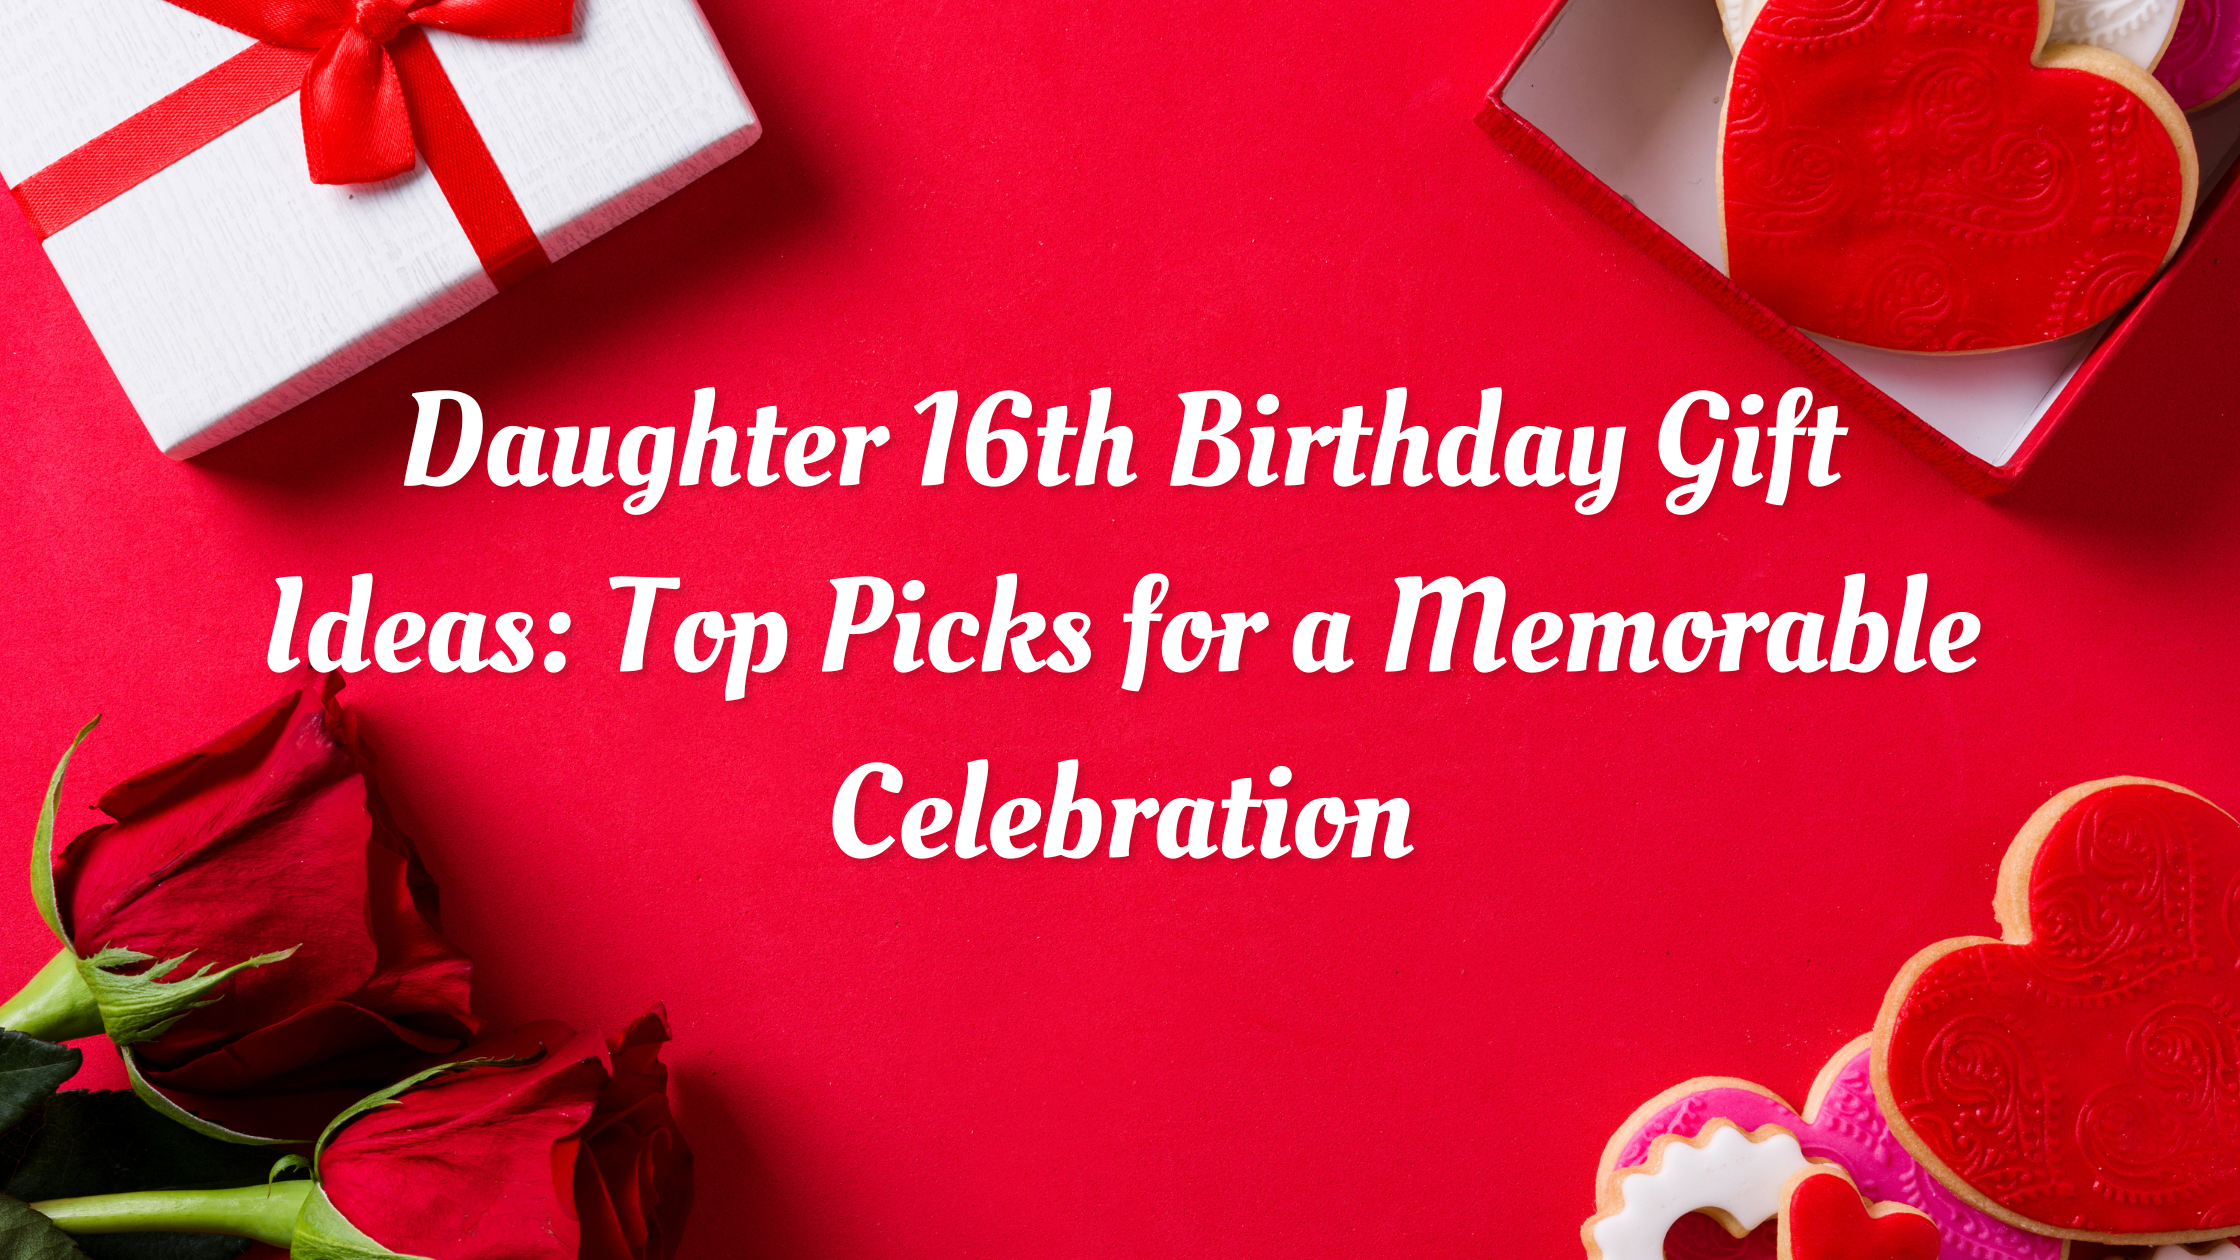 Daughter 16th Birthday Gift Ideas: Top Picks for a Memorable Celebration